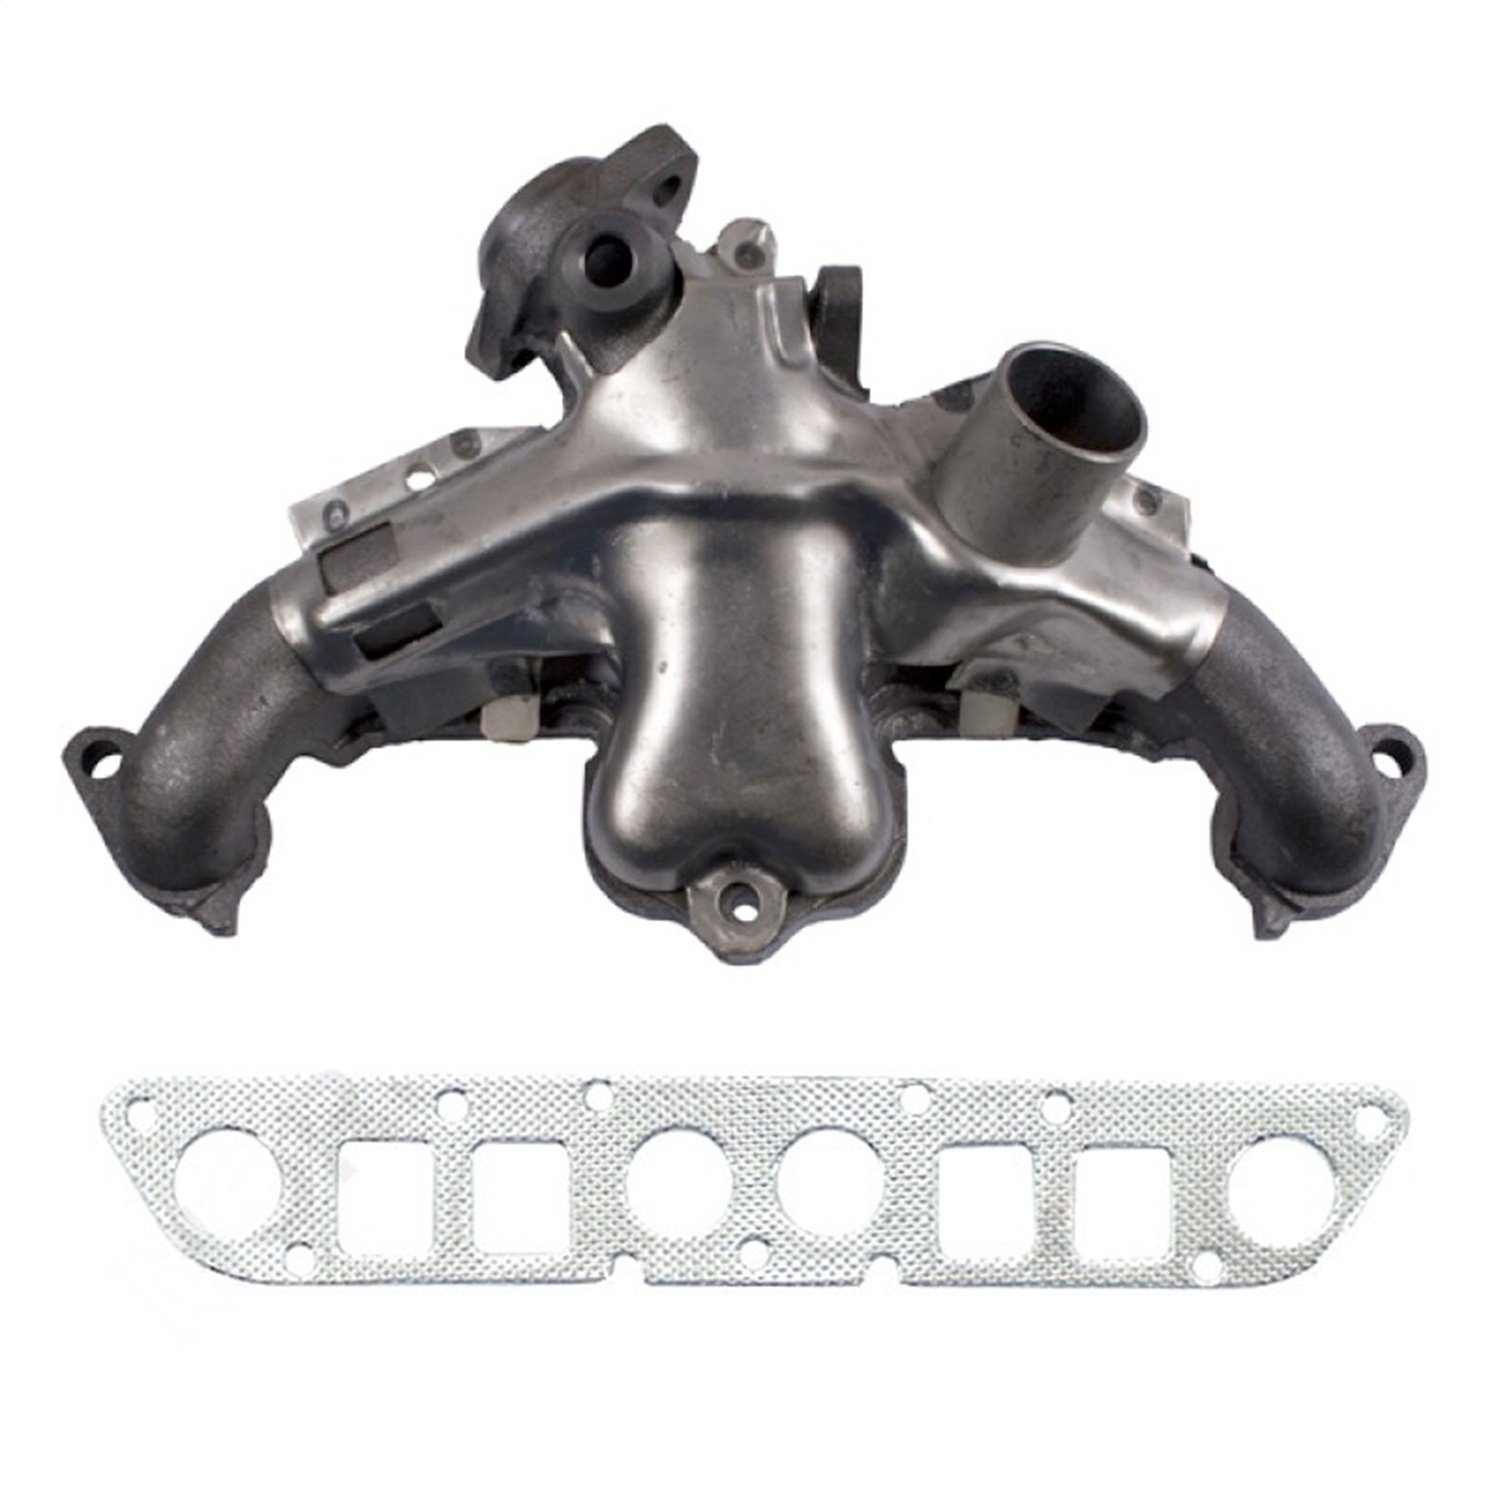 Exhaust Manifold Kit 2.5L Includes Manifold and Gasket 1991-2002 Wrangler 1991-2000 Cherokee